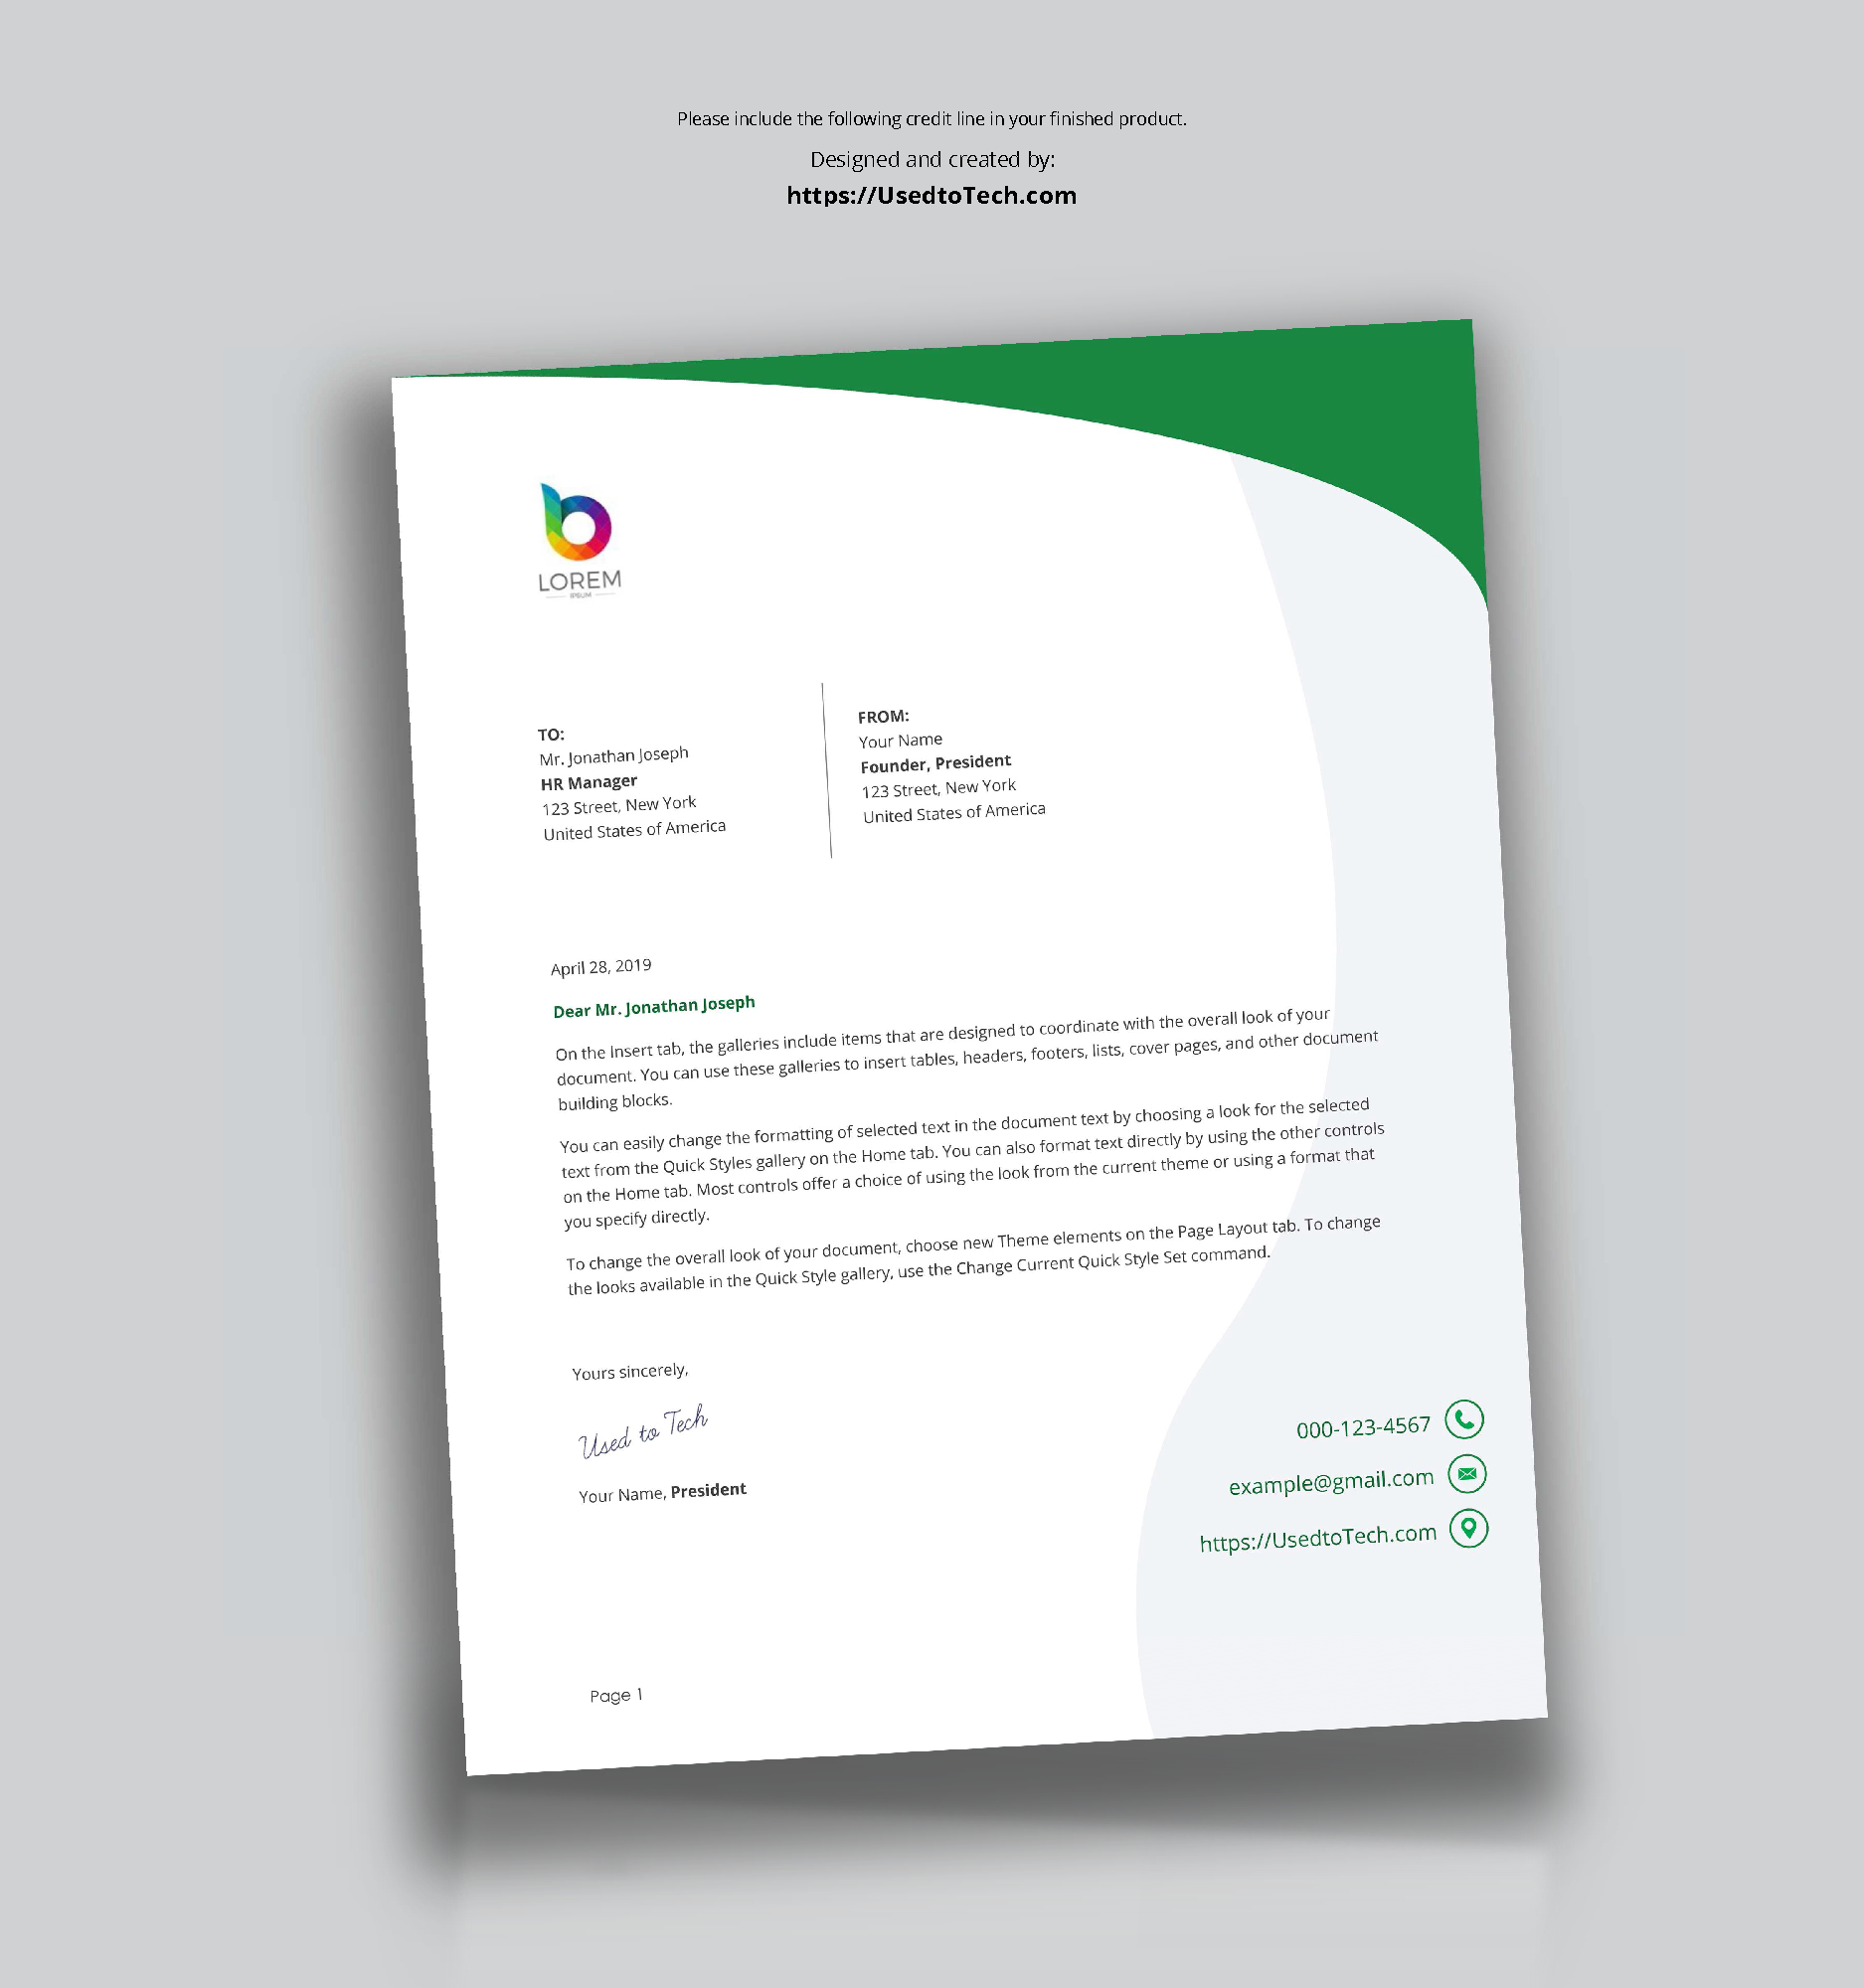 Perfect Letterhead Design In Word Free - Used To Tech For Free Letterhead Templates For Microsoft Word